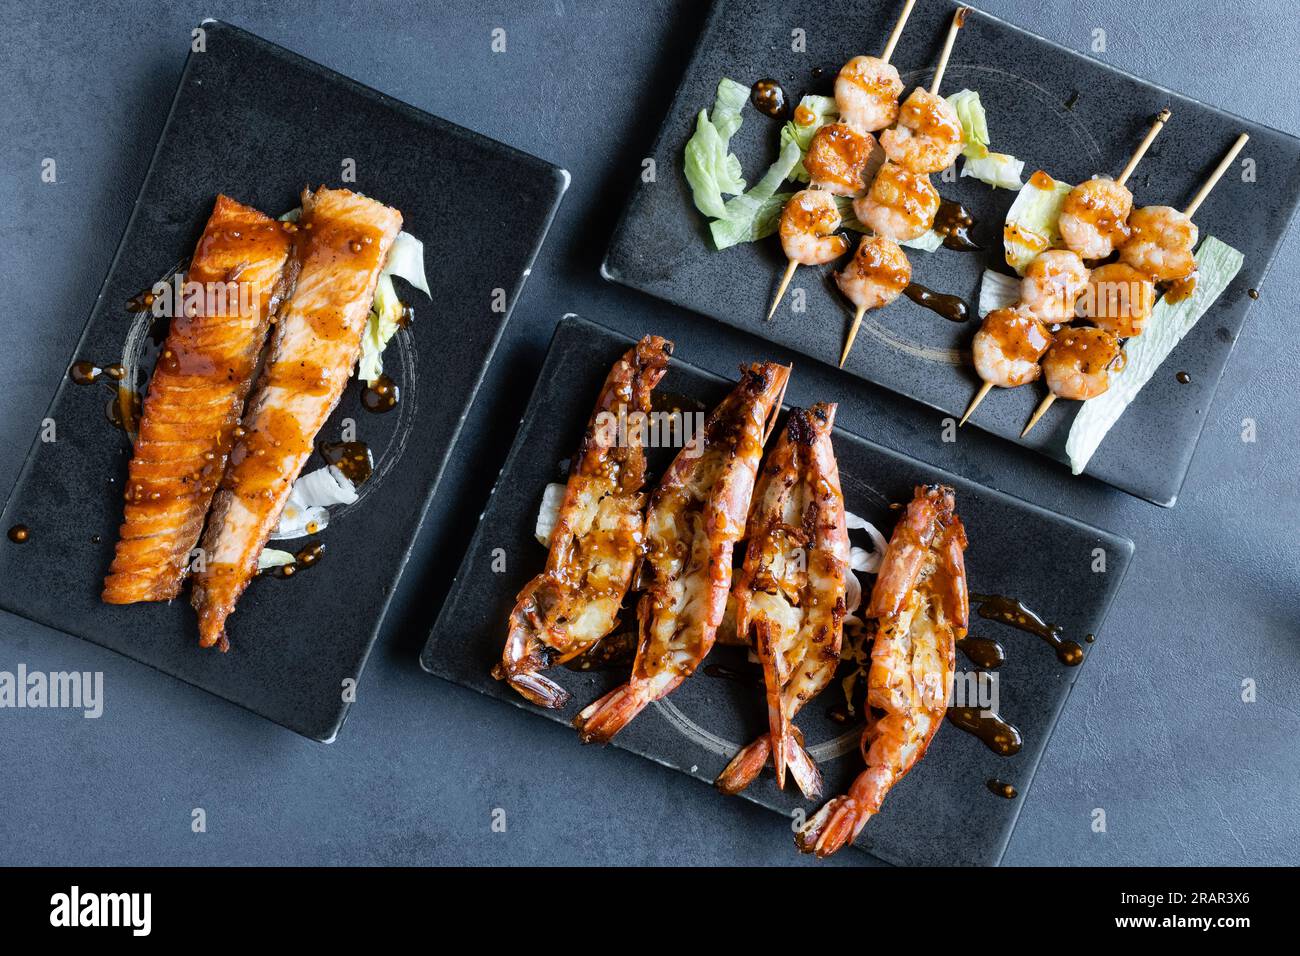 Sushi restaurant, top view of a mix of grilled Japanese dishes. Stock Photo